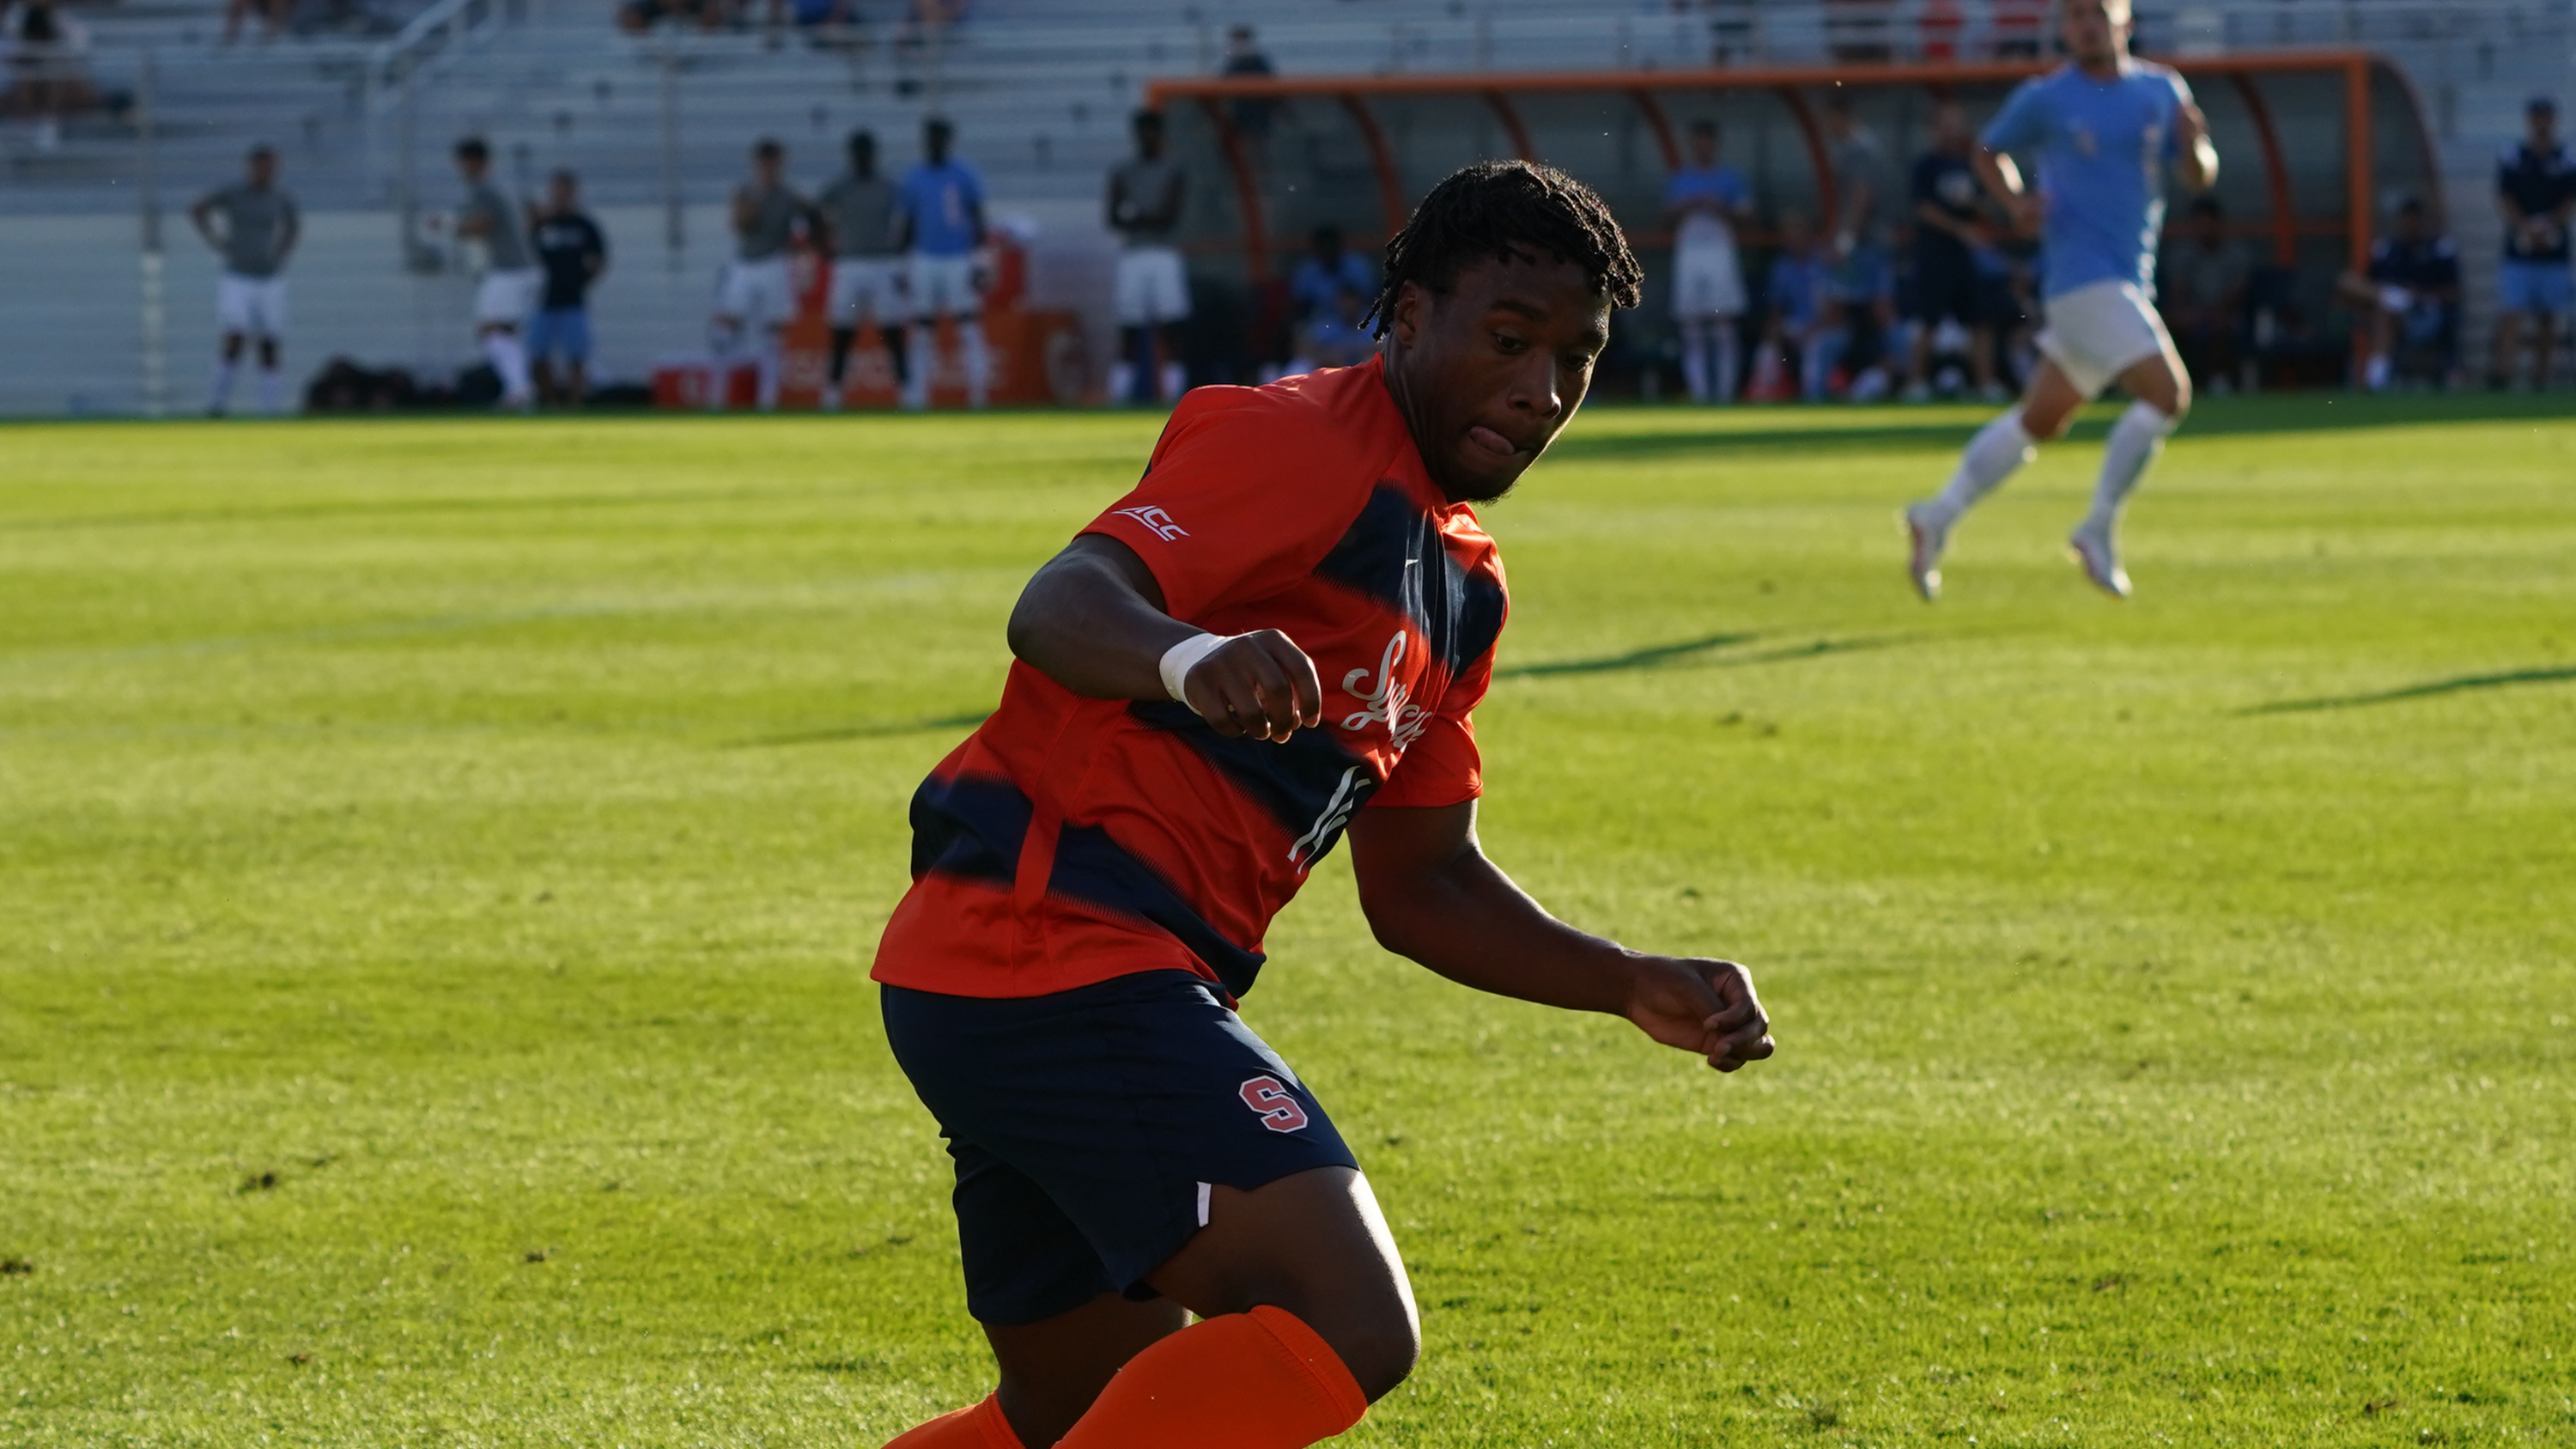 Pro Prospects to Know in DI Men's Soccer